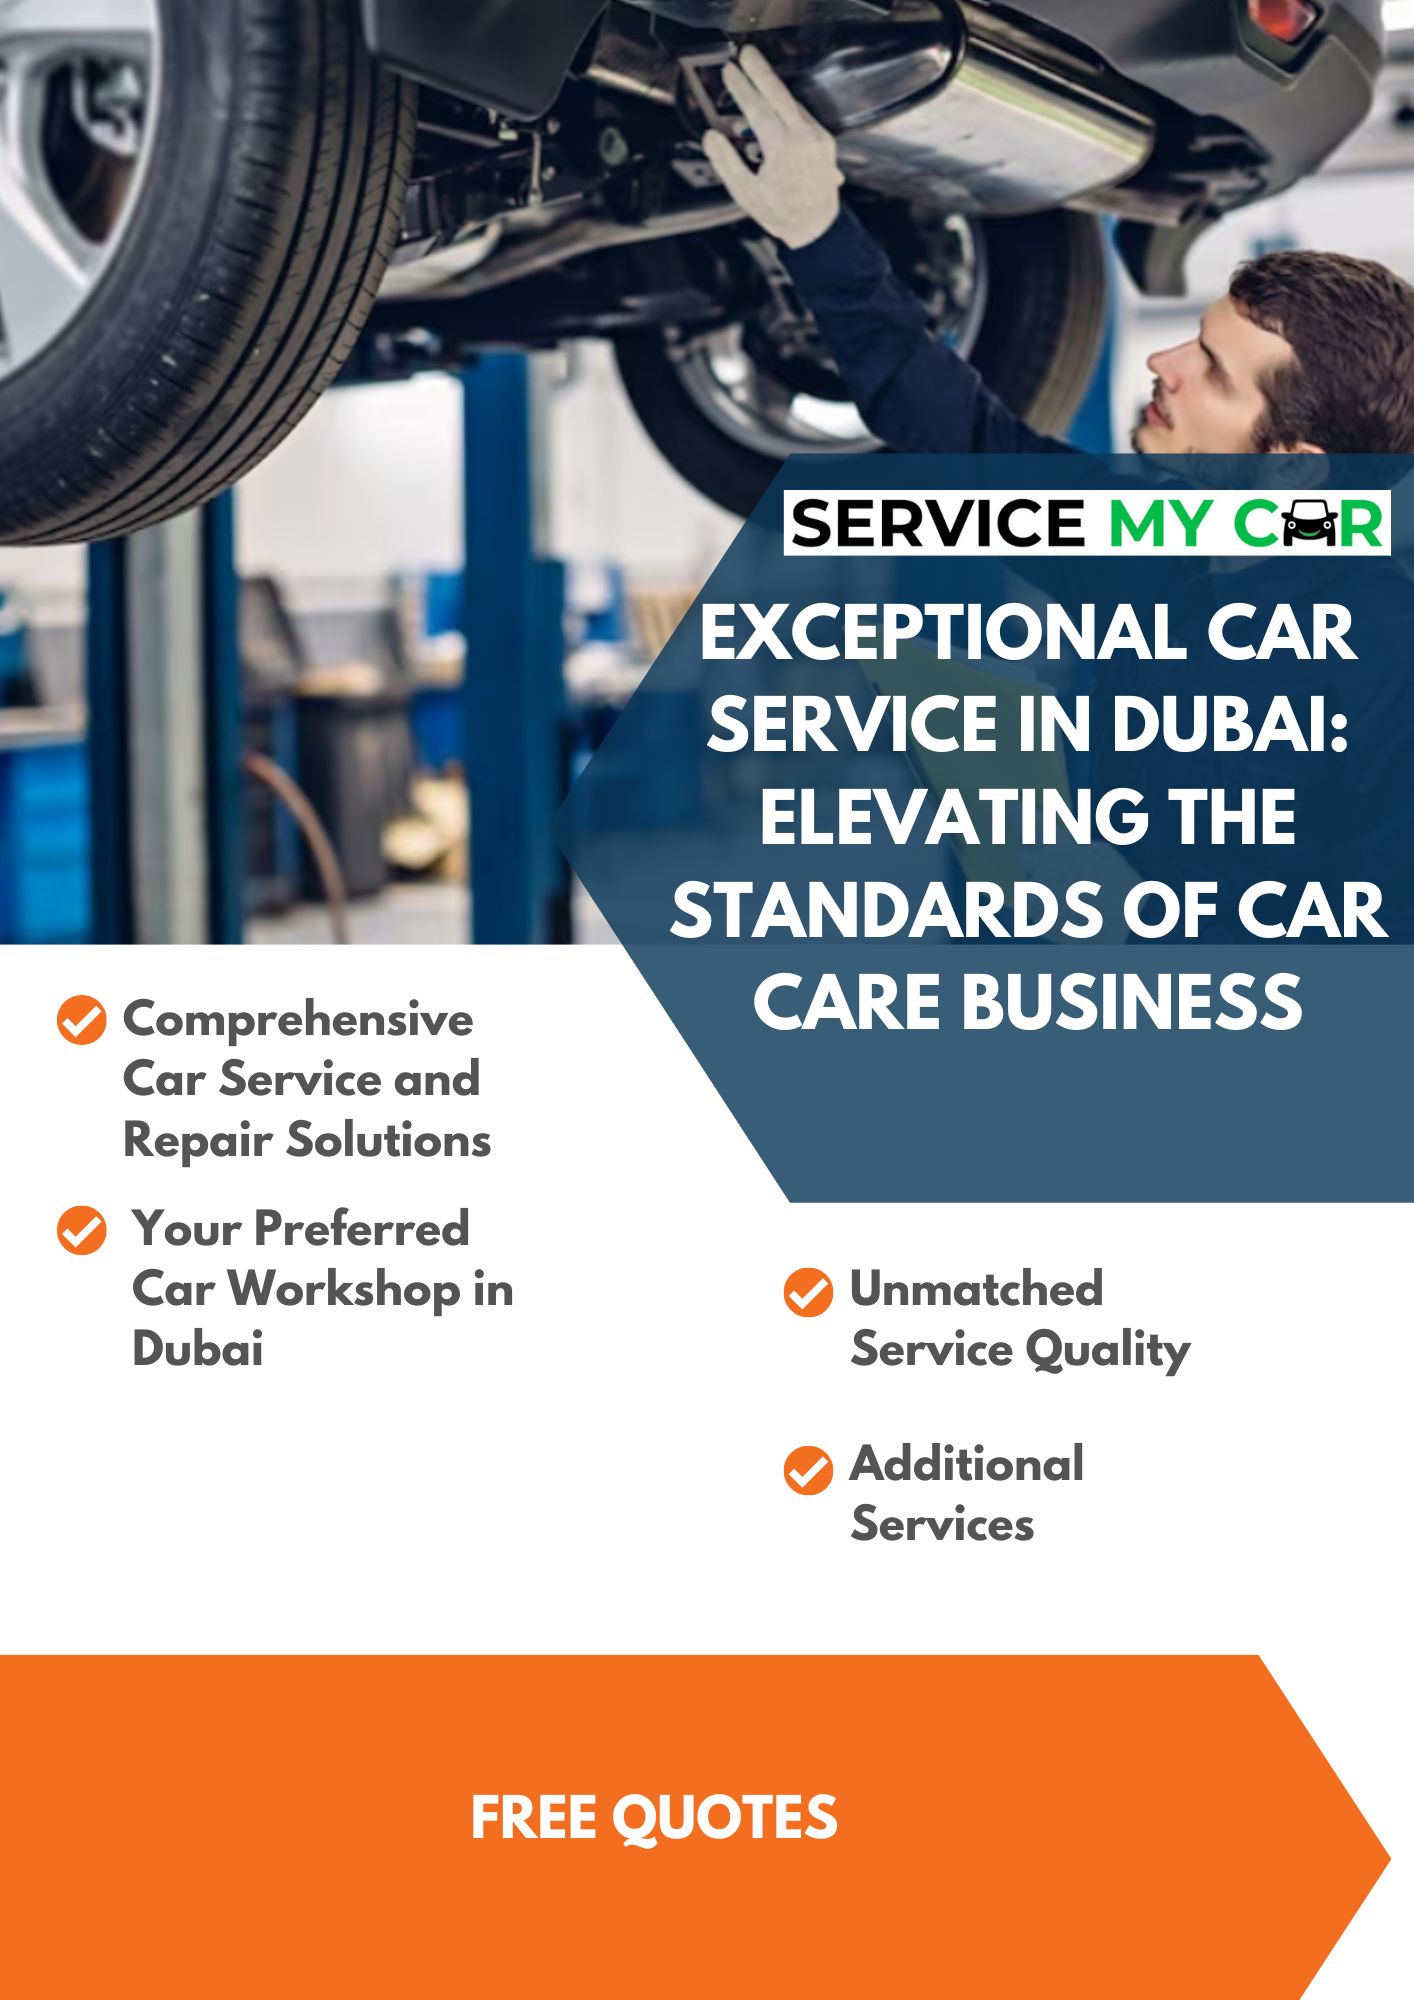 Exceptional Car Service in Dubai: Elevating the Standards of Car Care